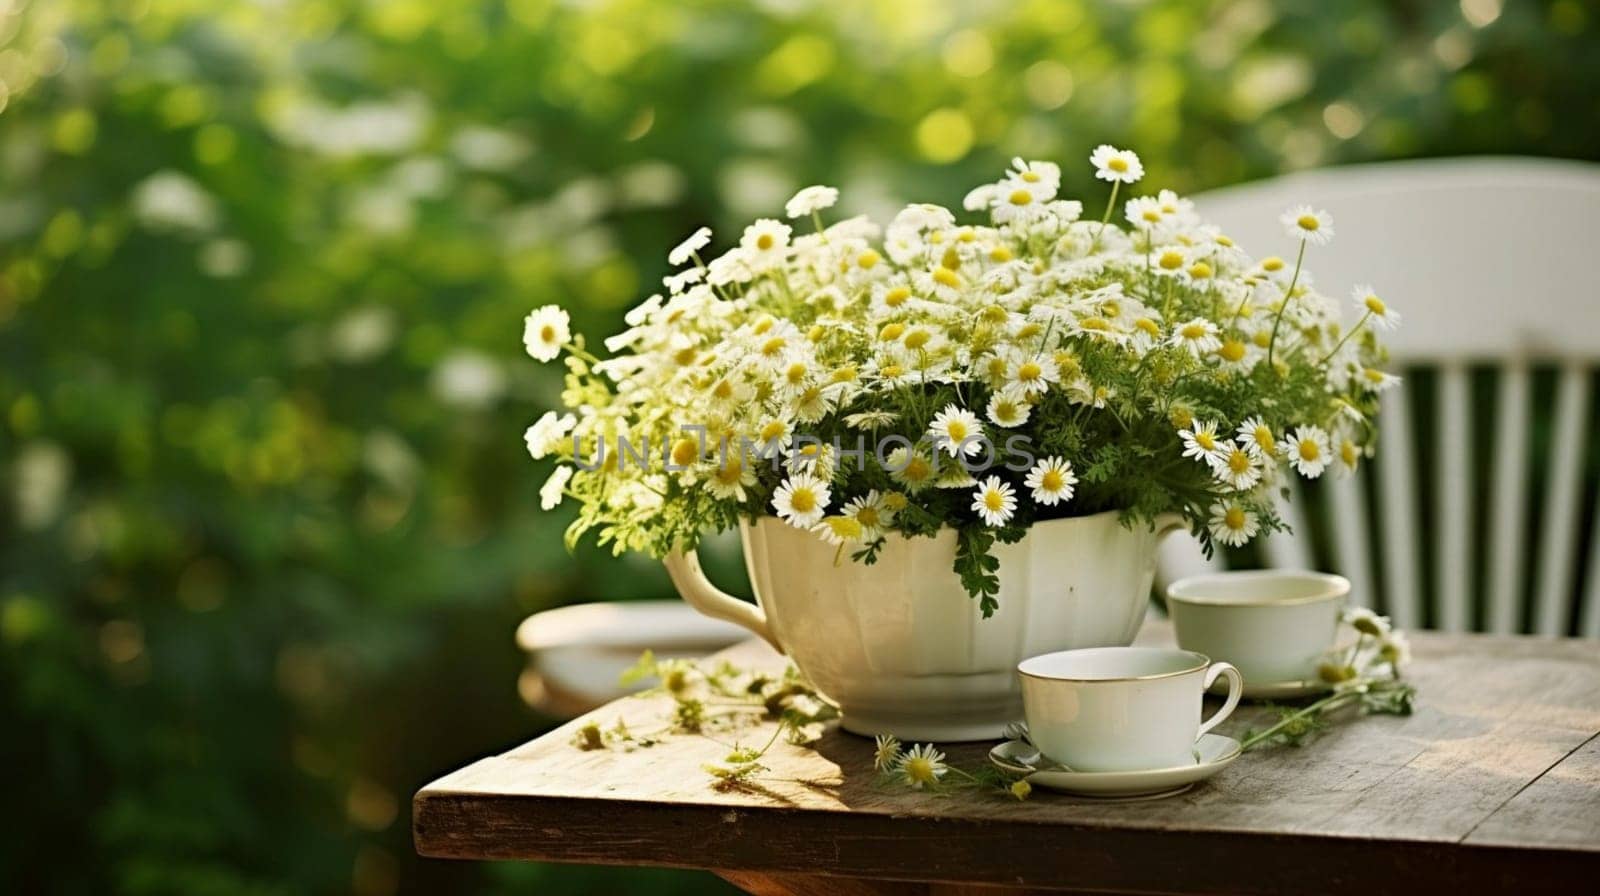 Teapot with white daisies on a wooden table outdoors. High quality photo